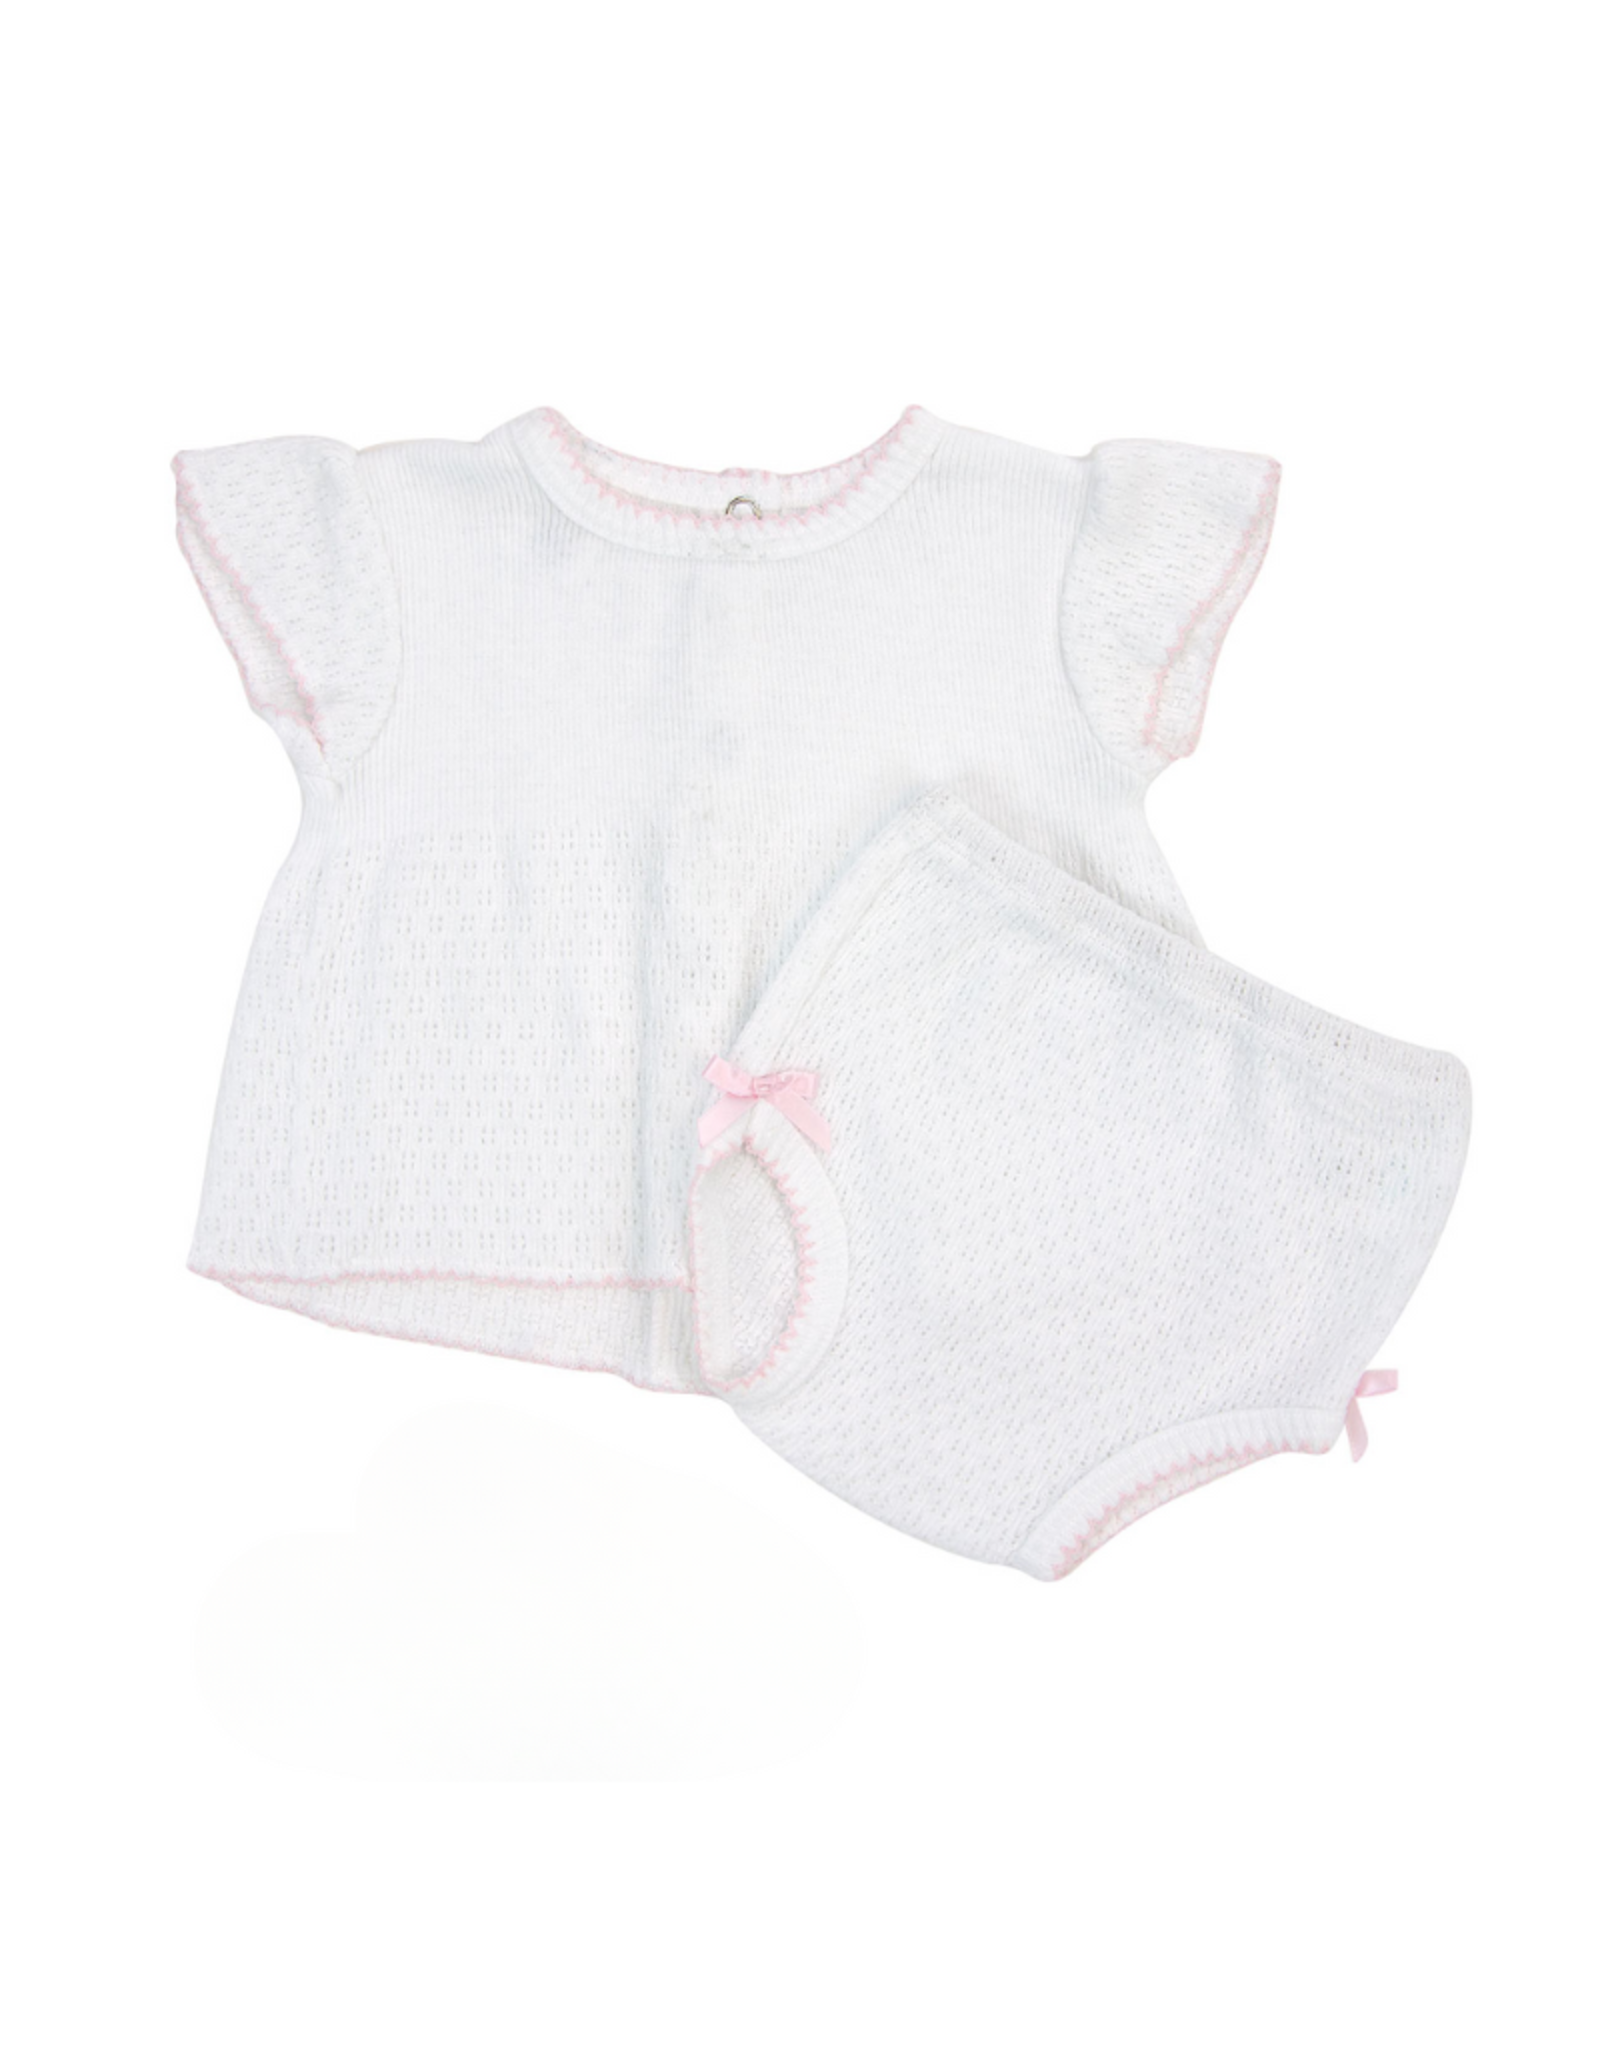 Paty Diaper Set With Pink Trim